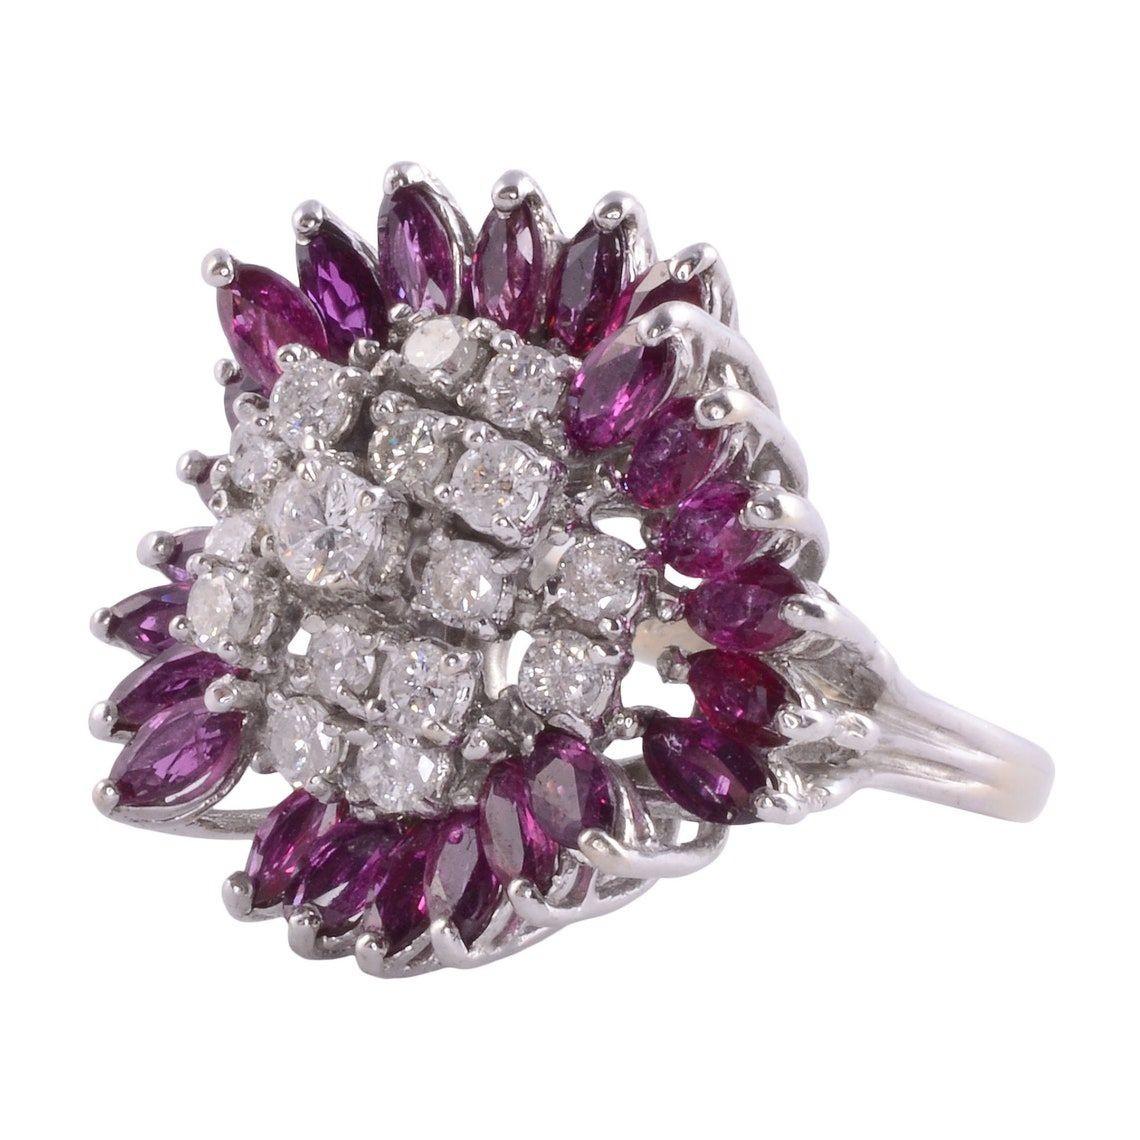 Estate purple red sapphire & diamond white gold ring. This 14 karat white gold ring features a basket setting with 24 purple red marquise sapphires at .80 carat total weight and 17 round diamonds at .81 carat total weight. The diamonds have I1-2